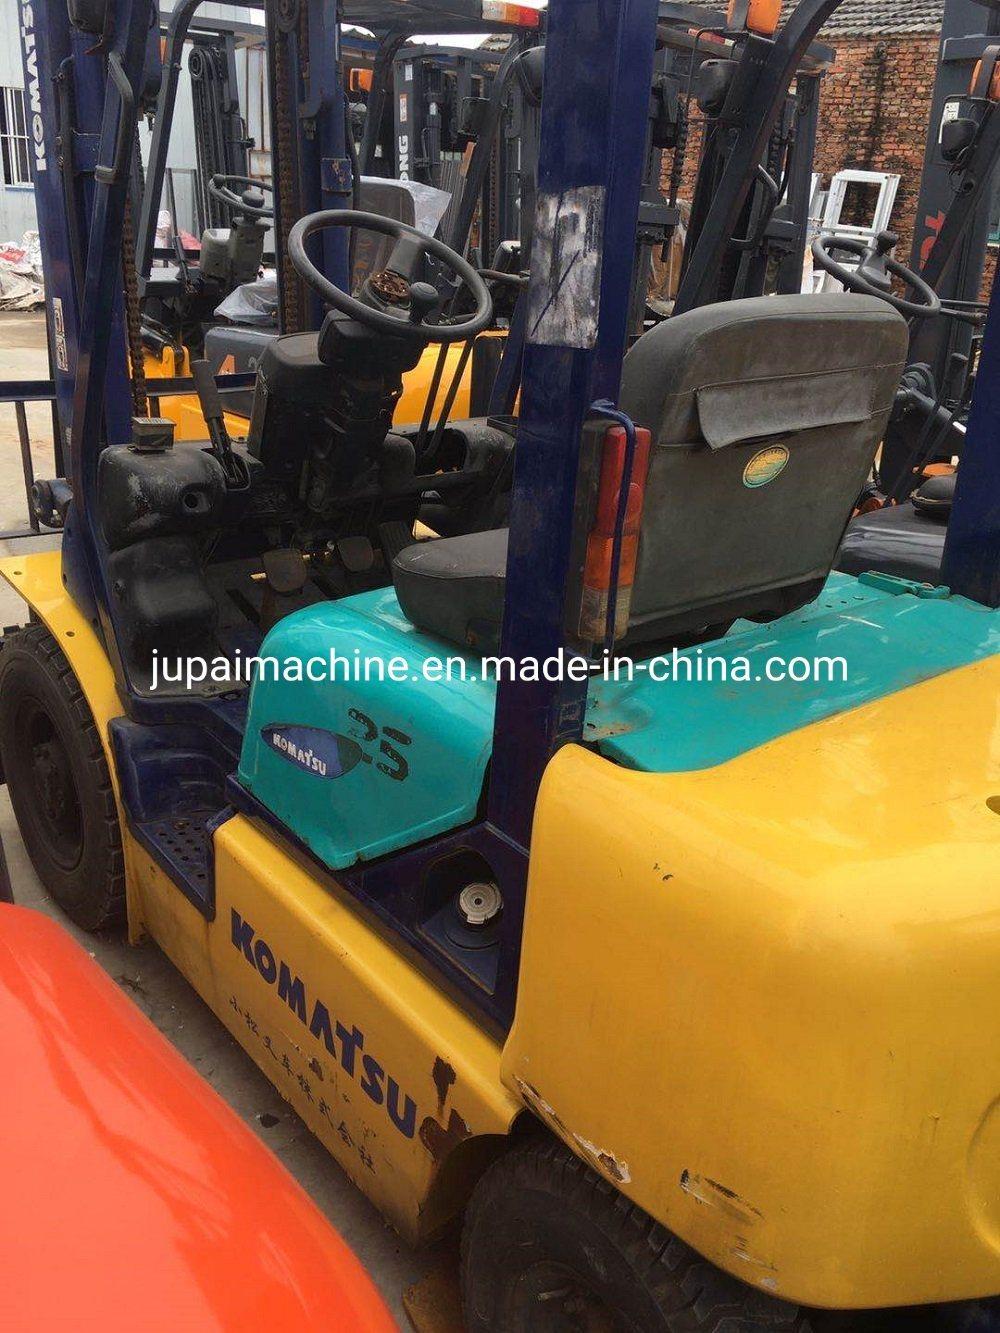 High Quality Fast Delivery Second-Hand Komatsu Forklift Diesel Lift Manual Lifting Equipment Transport Used Forklift